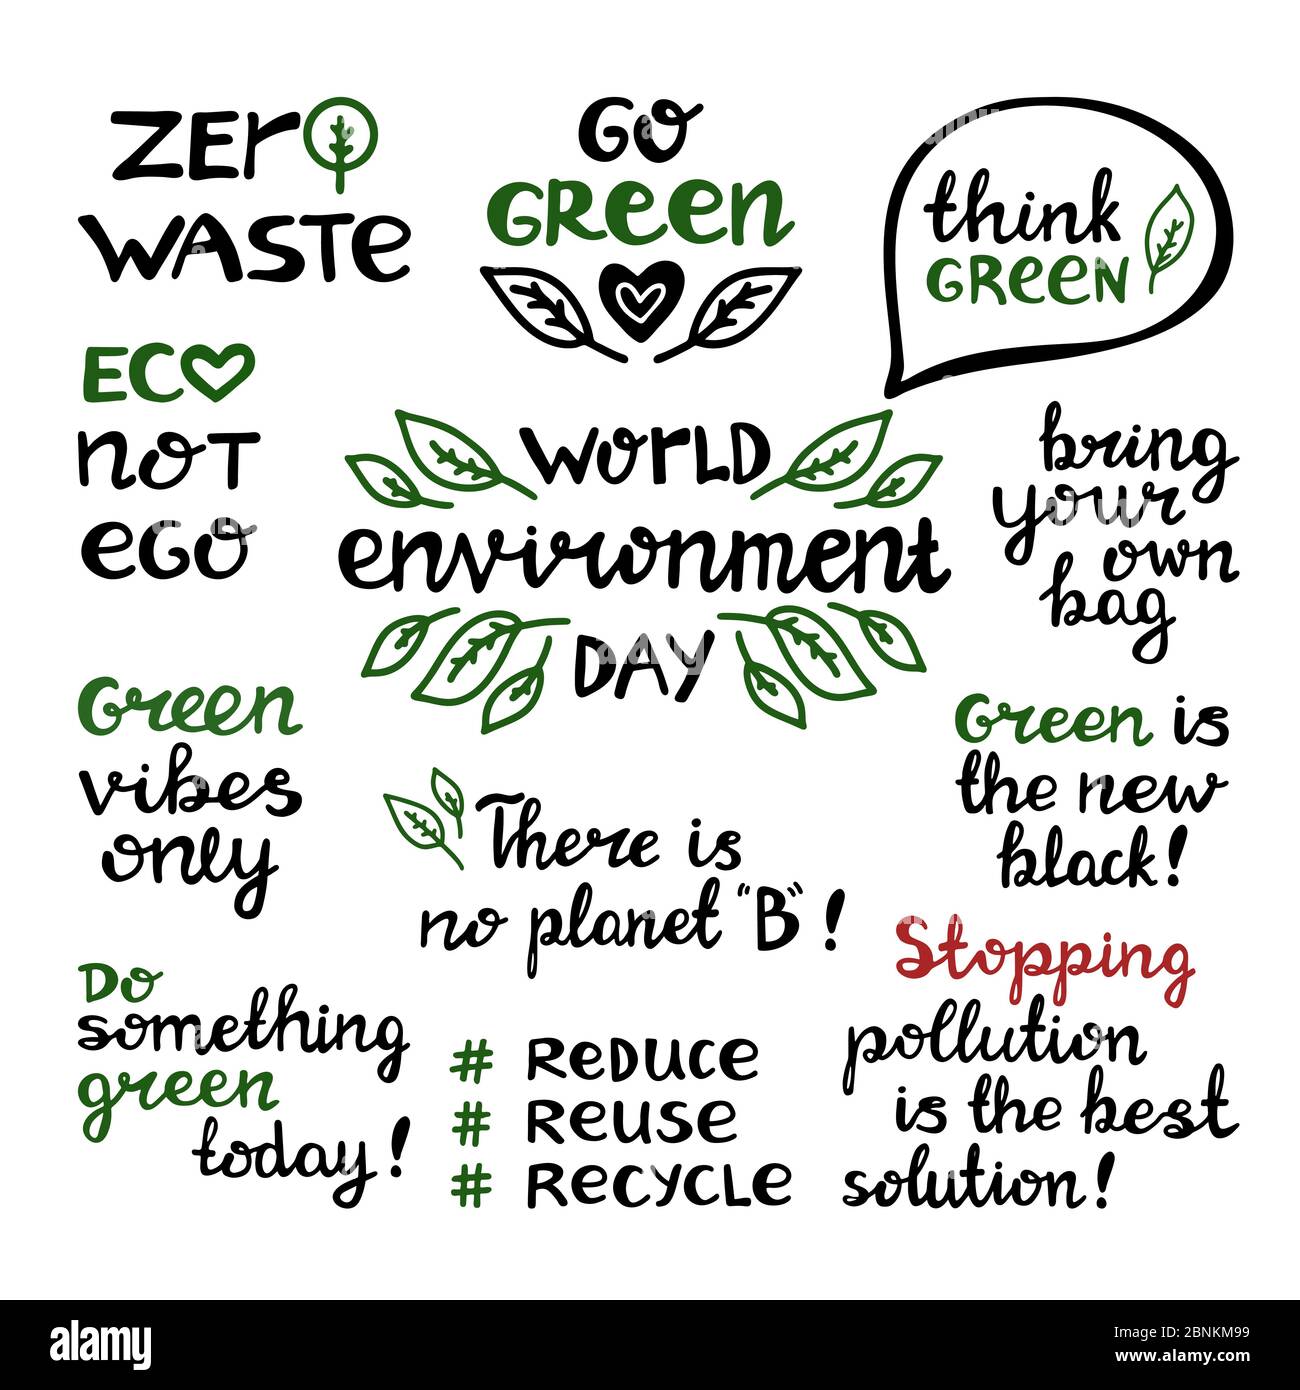 Handwritten doodle ecological quotes. World environmet day, zero waste, go green, eco not ego, reduce reuse recycle, bring own bag. Isolated on white Stock Vector